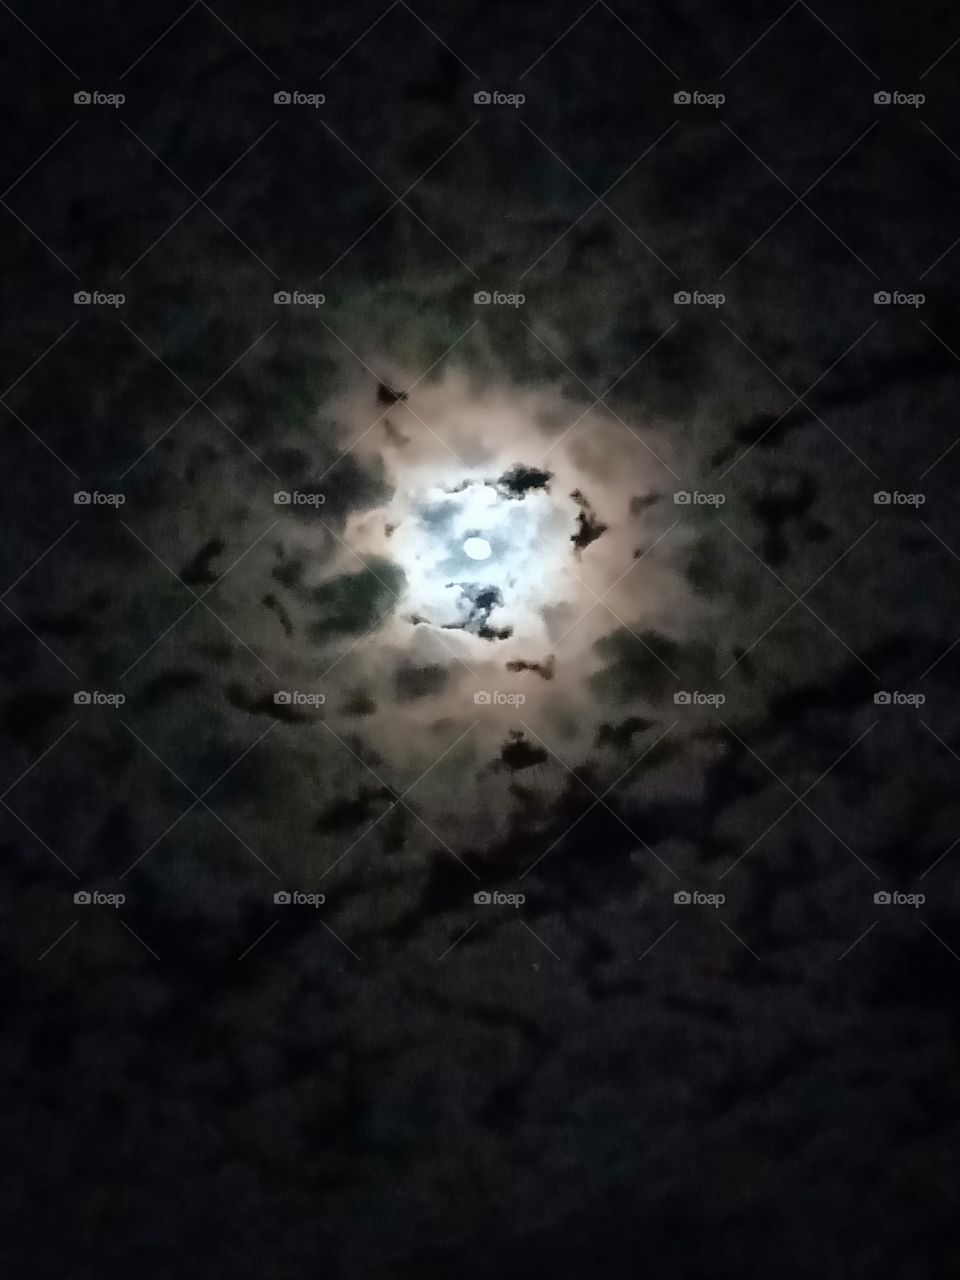 Between the clouds a beautiful moon rises in the night sky